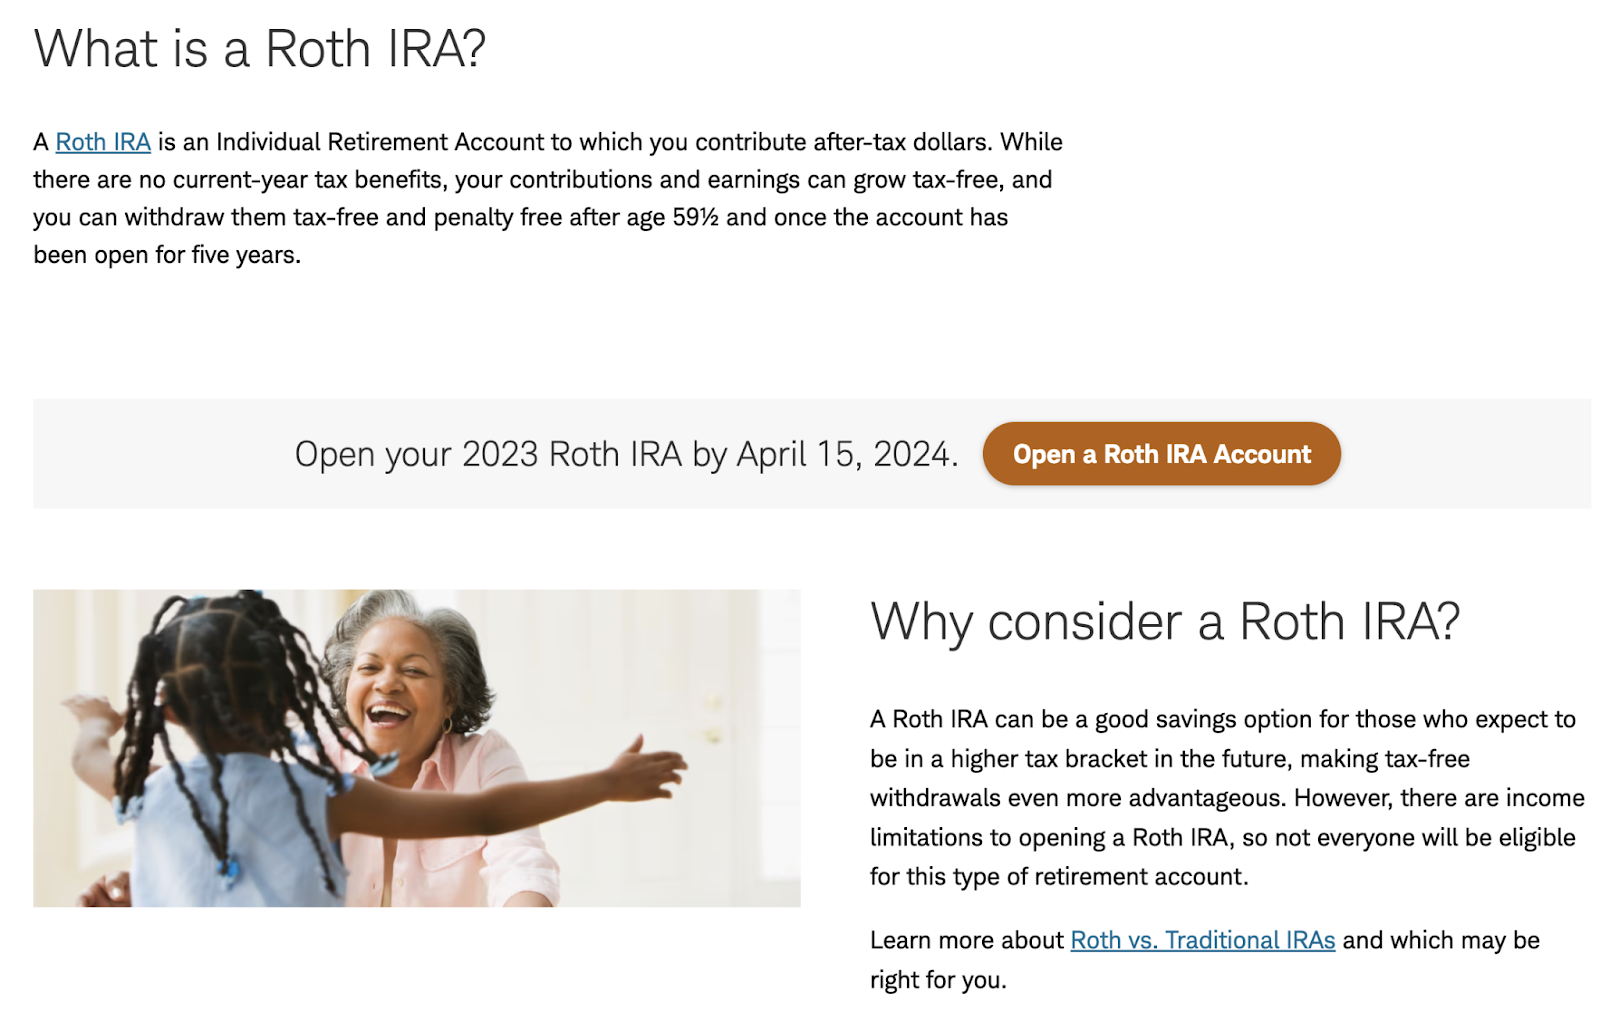 “what is a Roth IRA” and “why consider a Roth IRA" section of the above landing page